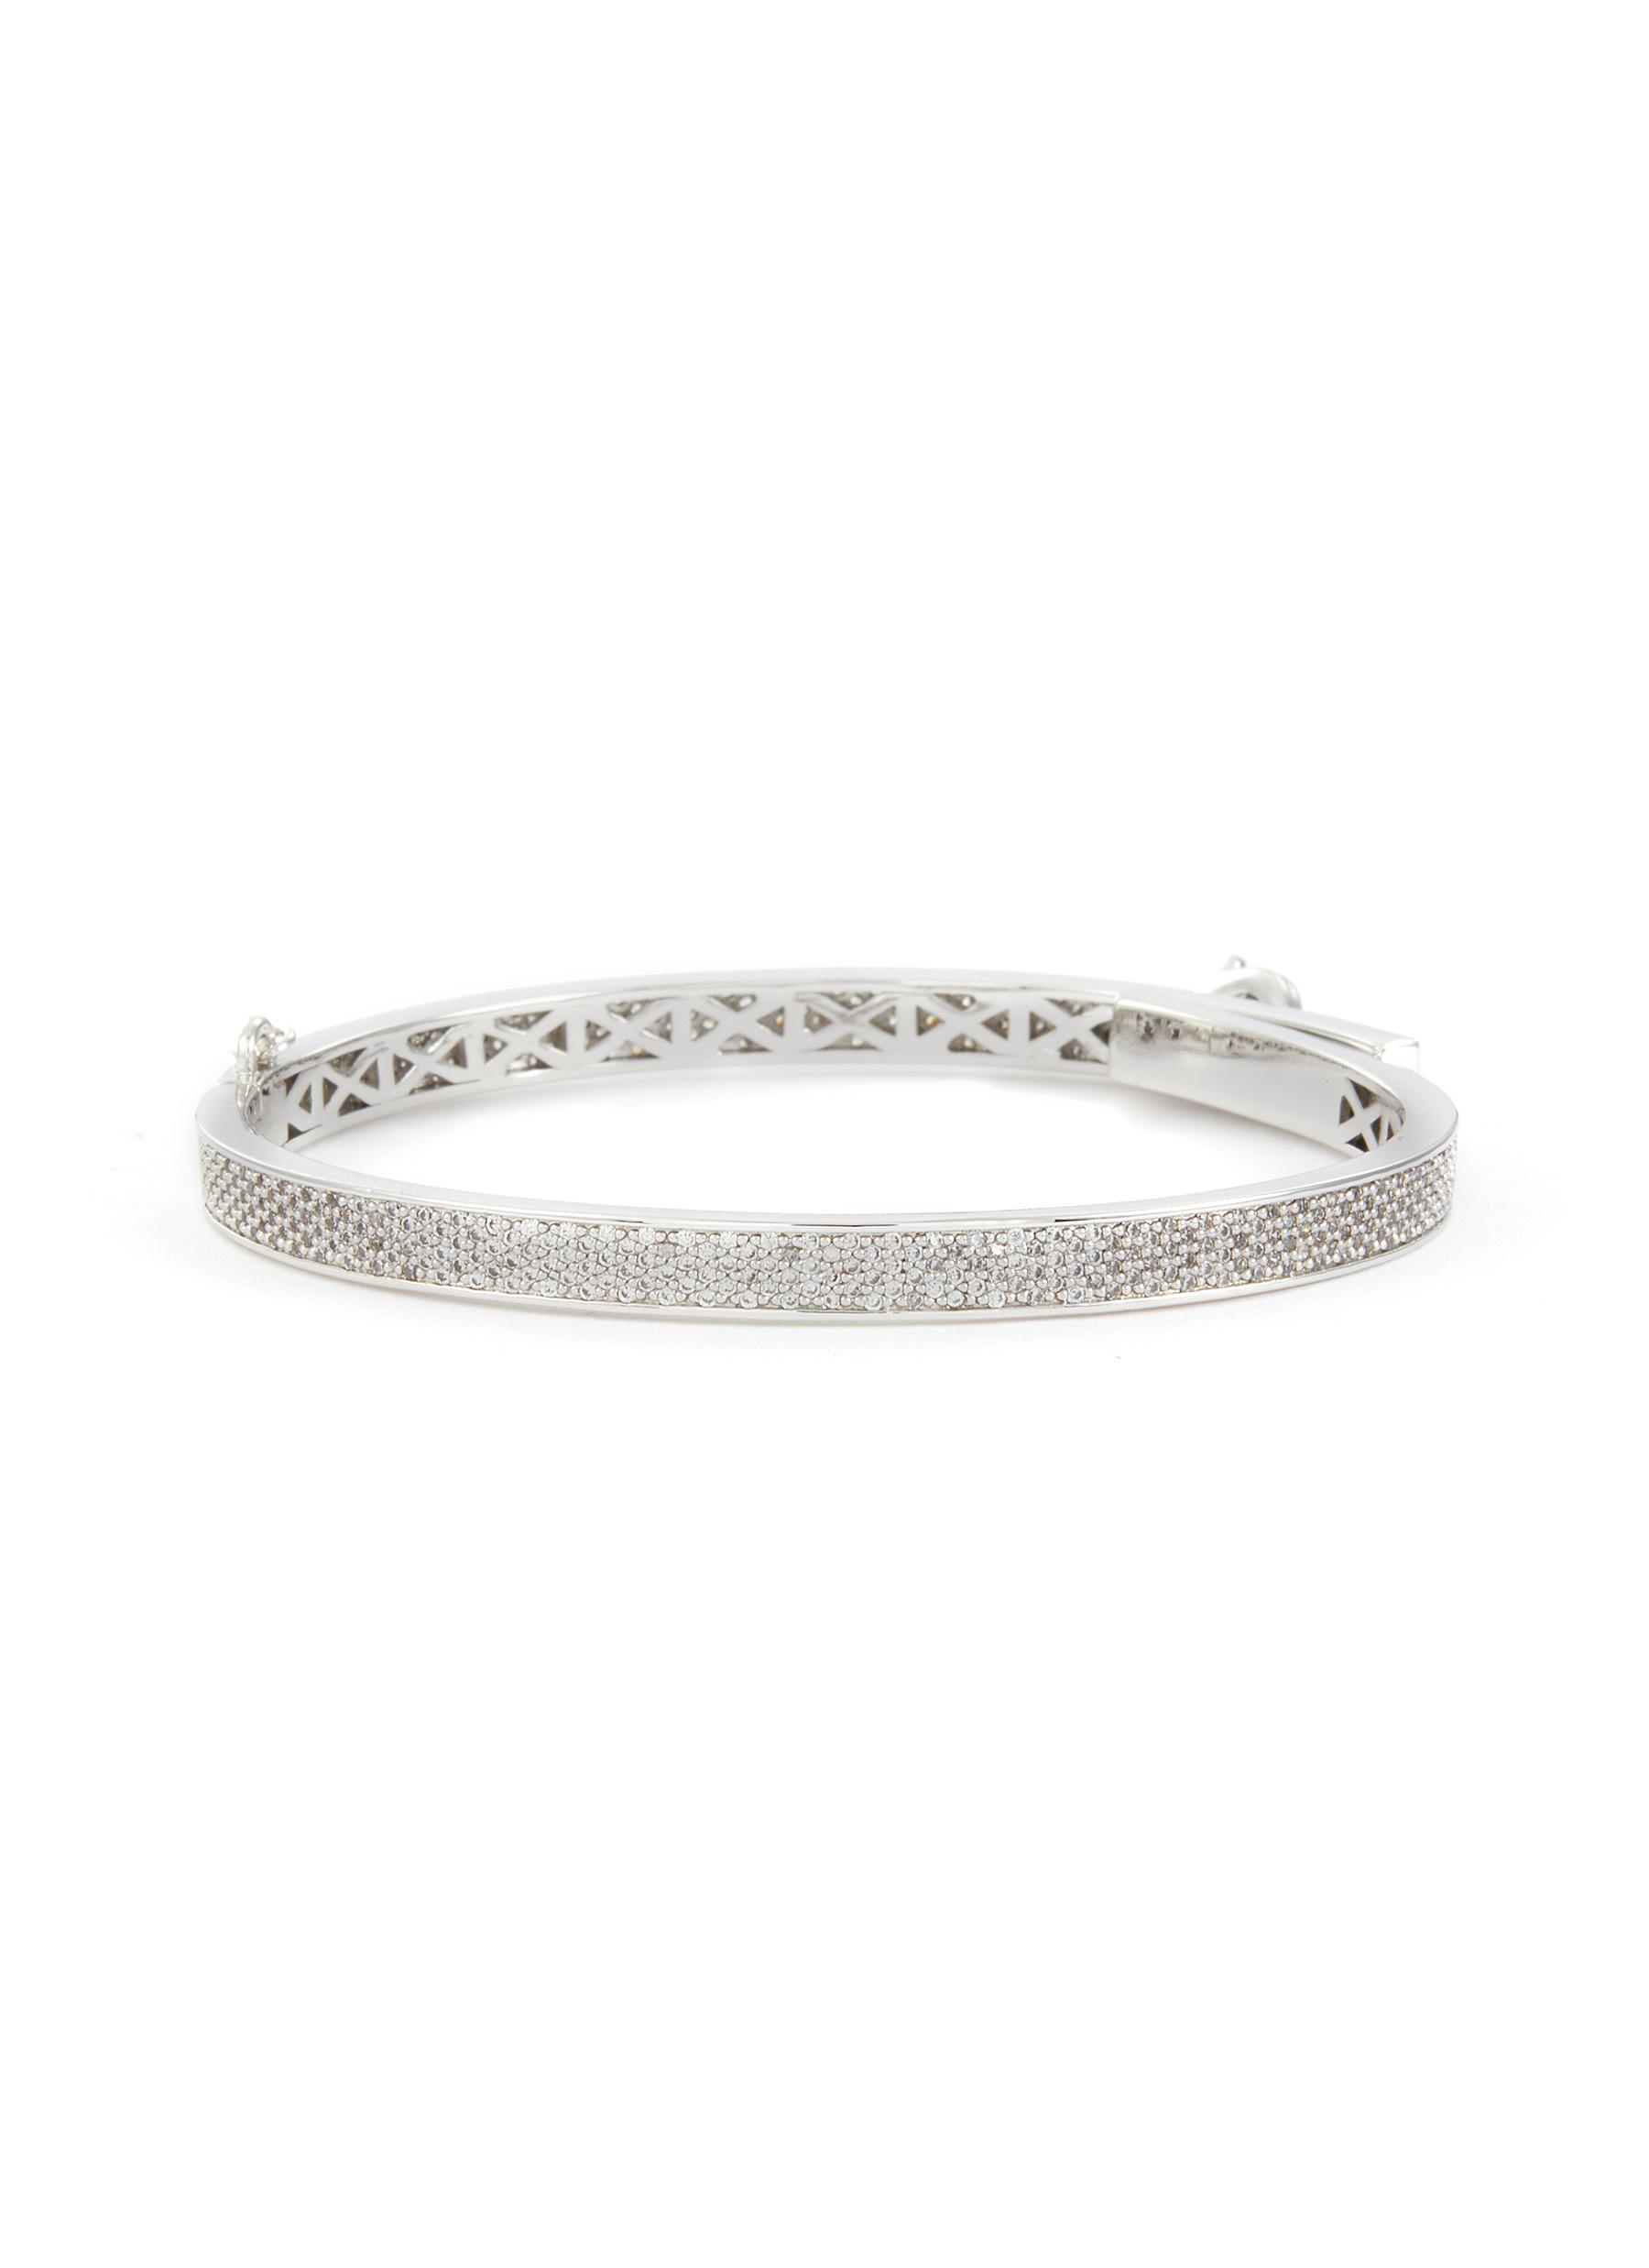 Crystal Silver Safety Chain Bangle